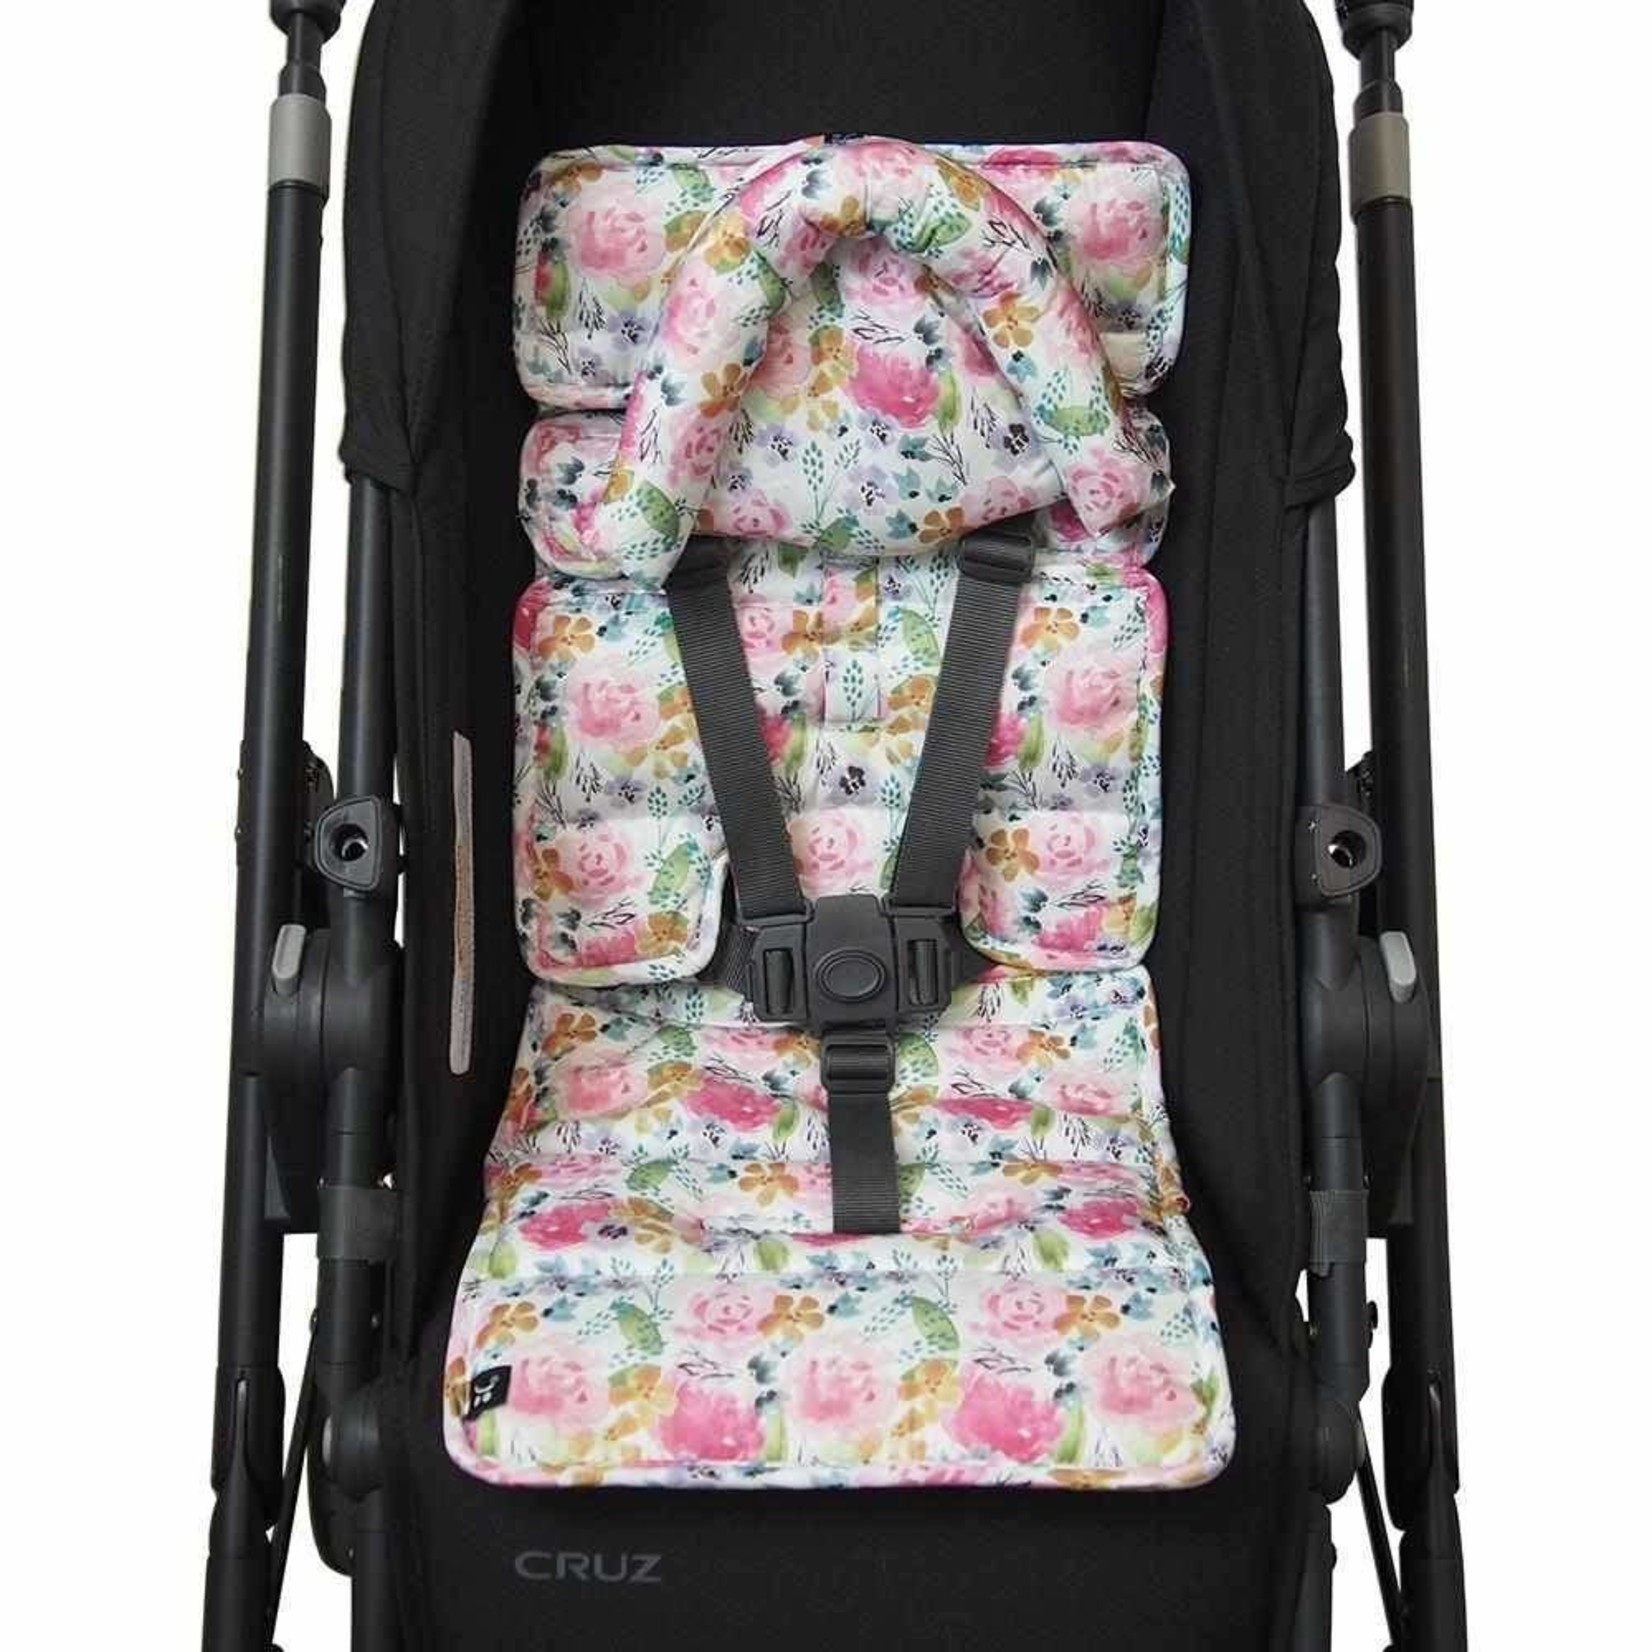 Outlookbaby Mini Pram Liner with adjustable head support - Floral Delight